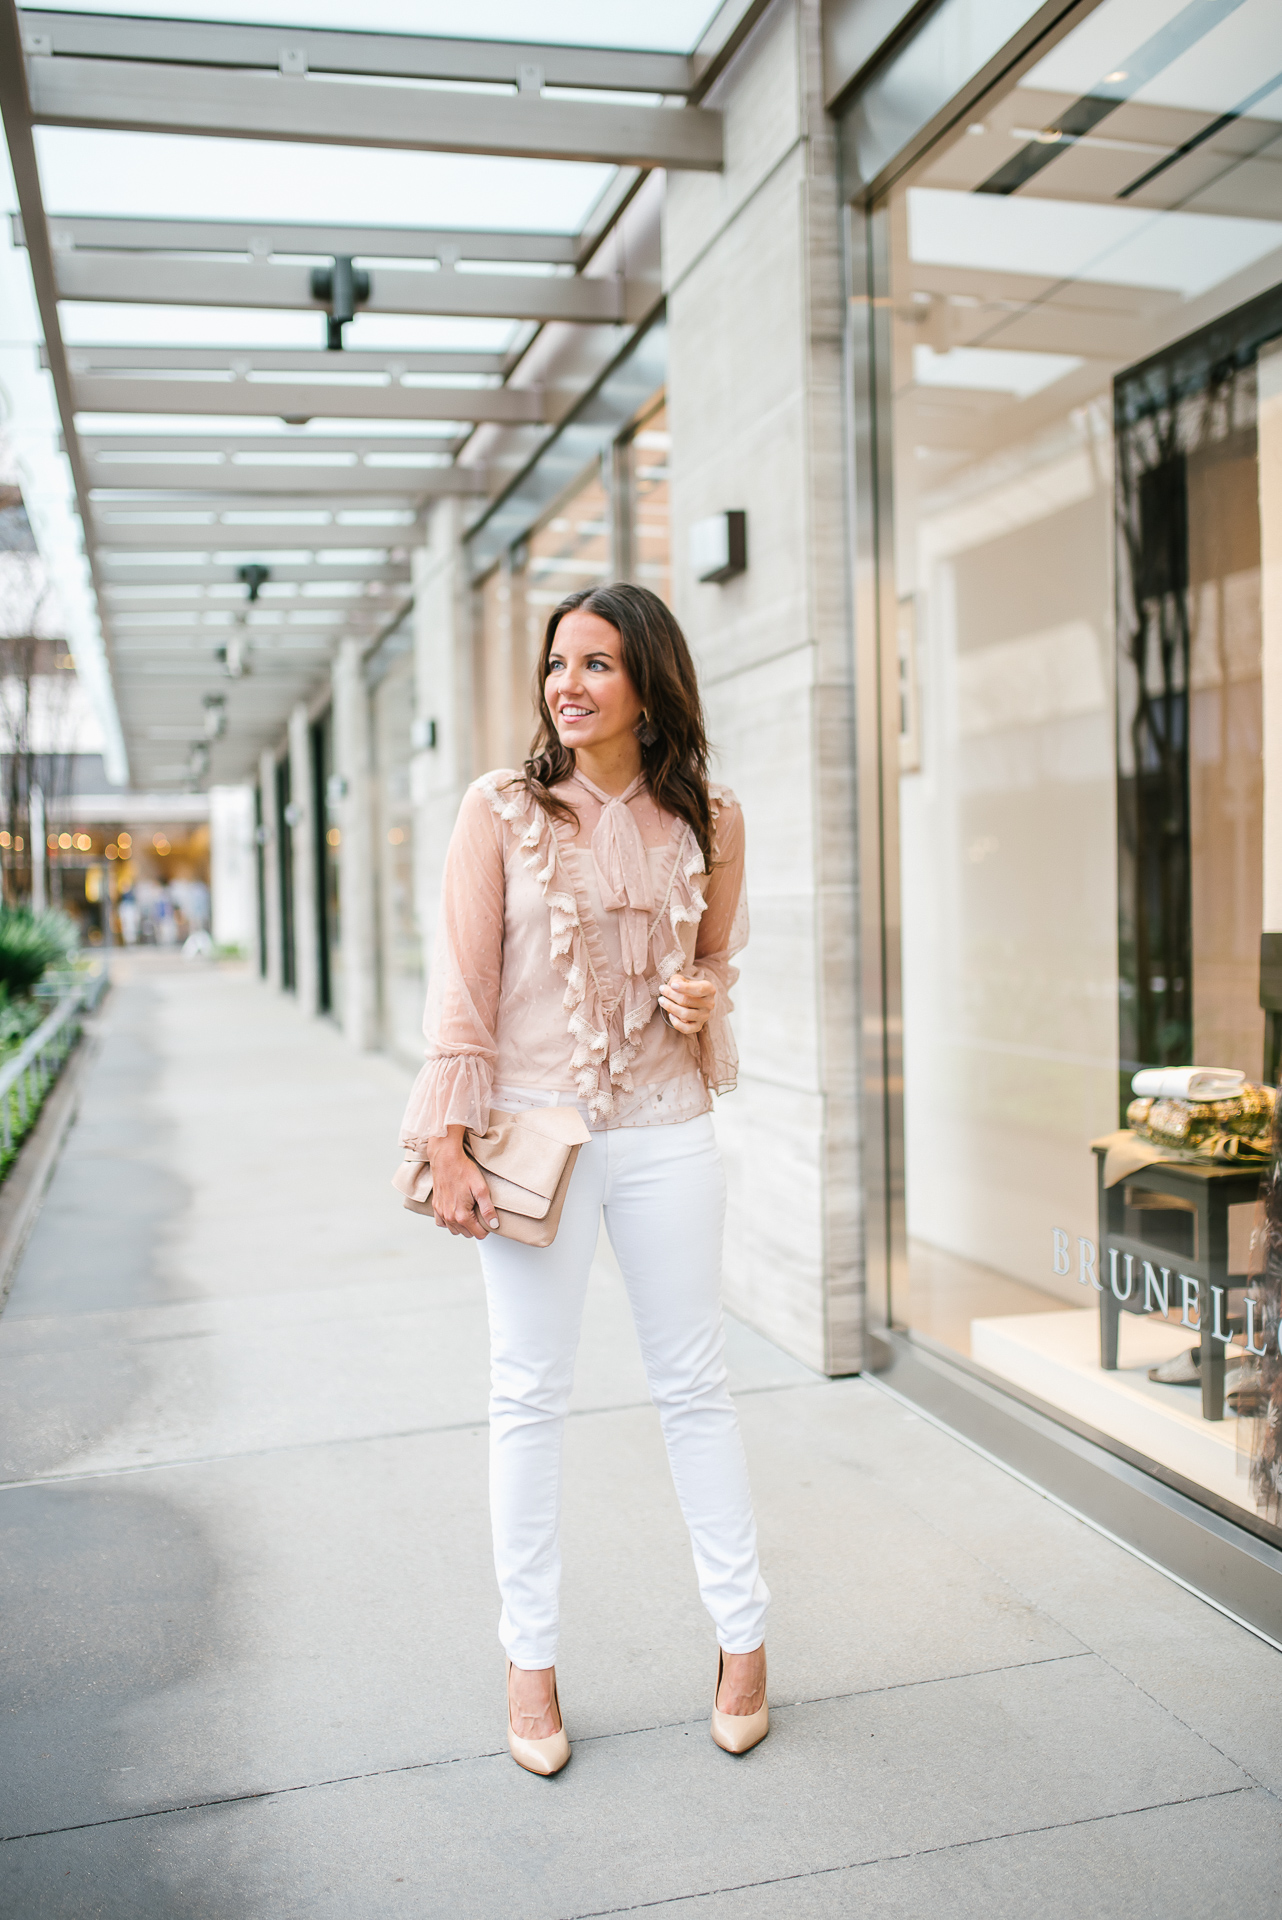 http://ladyinviolet.com/wp-content/uploads/2019/02/a-spring-outfit-sheer-top-white-skinny-jeans.jpg